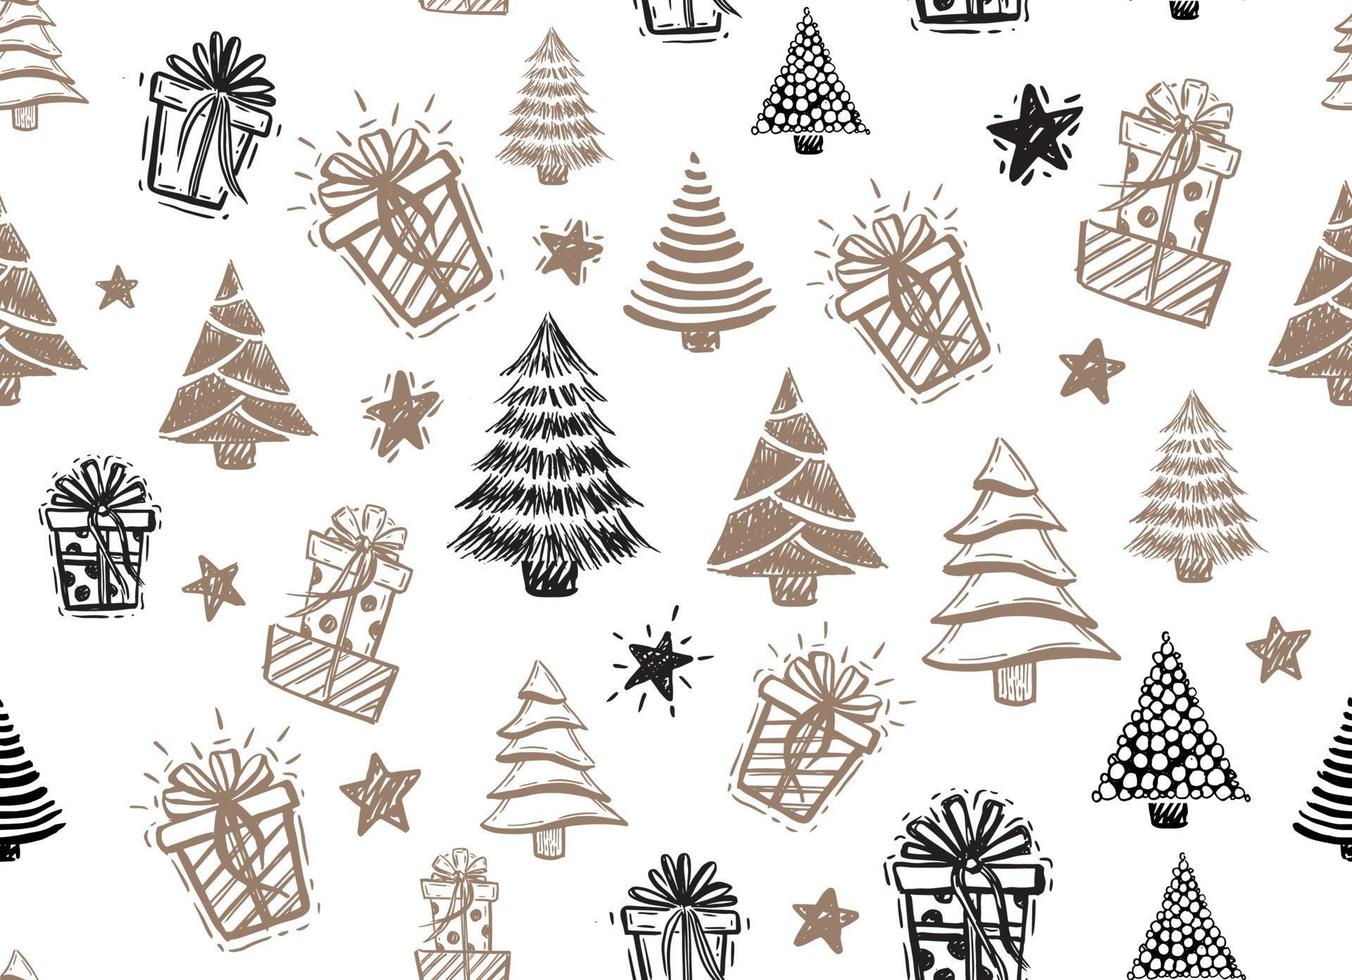 Tree, Gift boxes, star set, hand drawn illustrations. vector